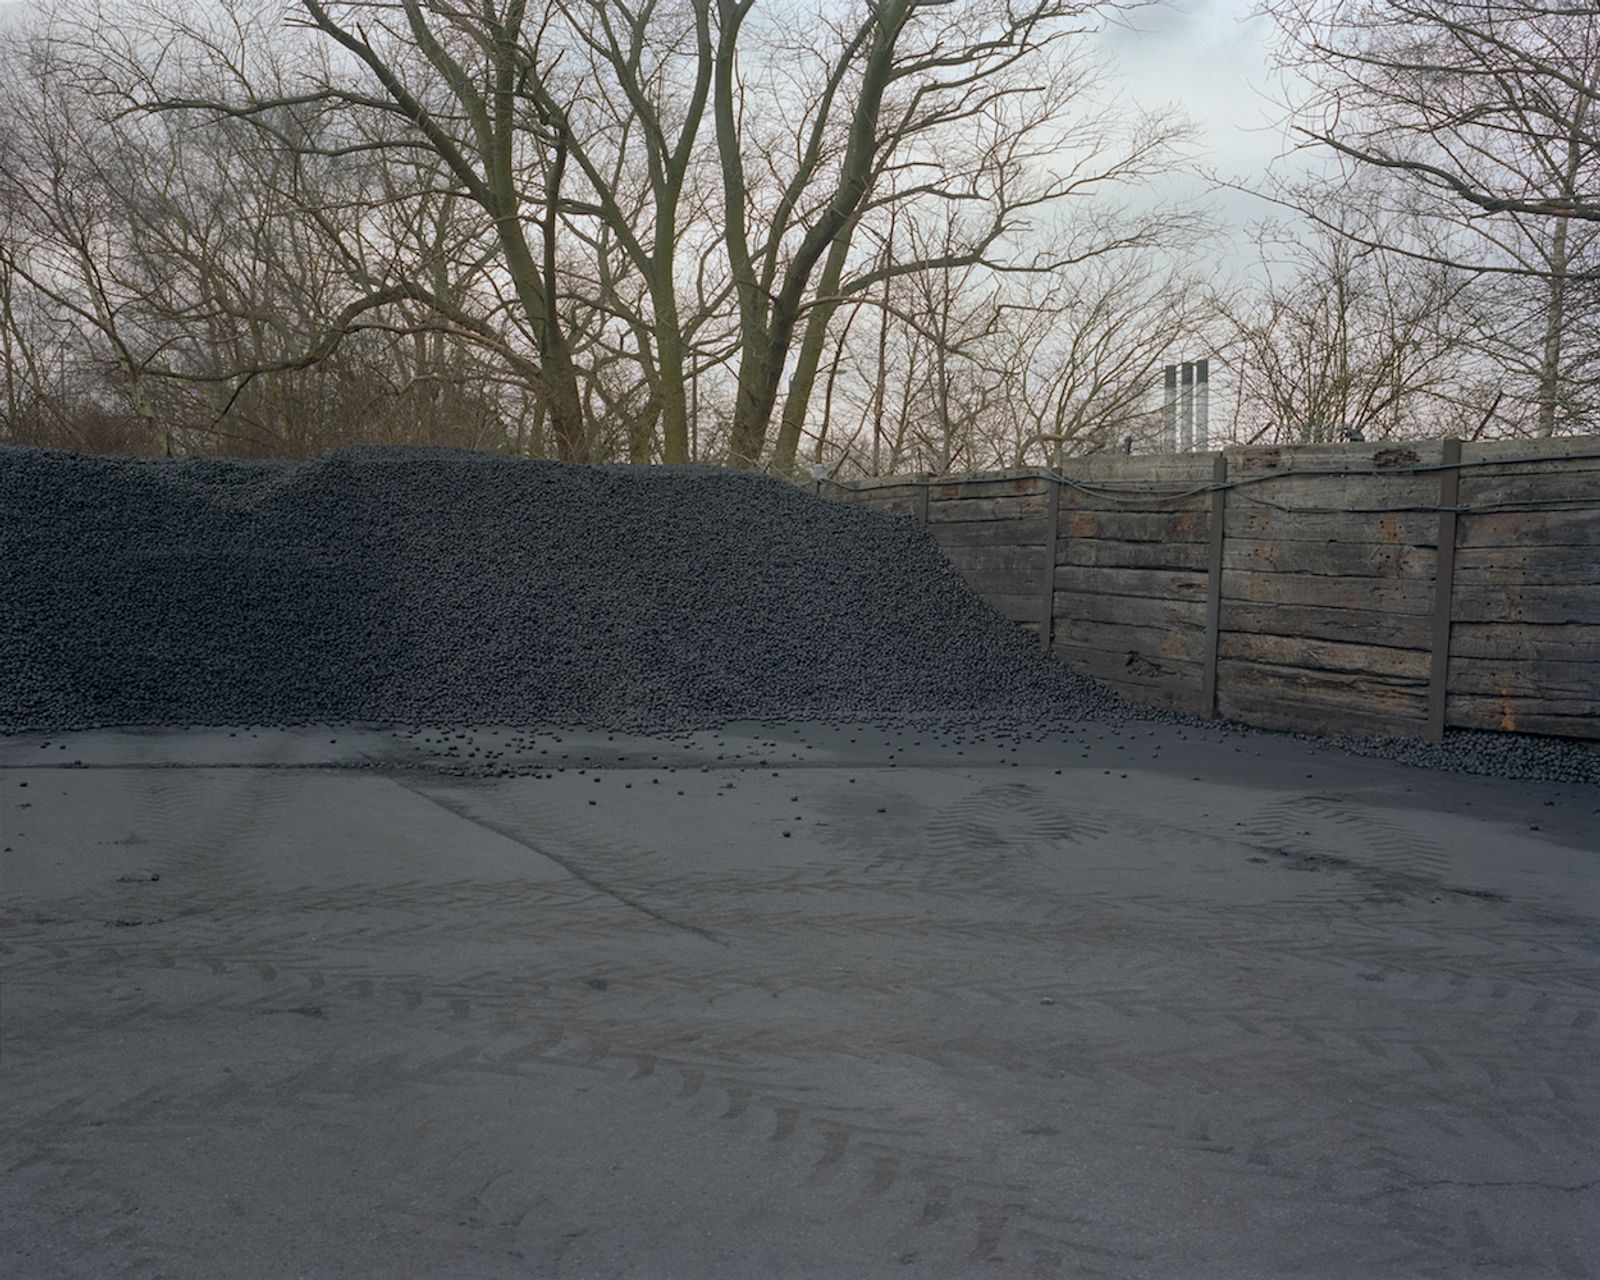 © David Severn - Coal piled at a fuel distribution depot on the site of the former Mansfield Crown Farm Colliery.